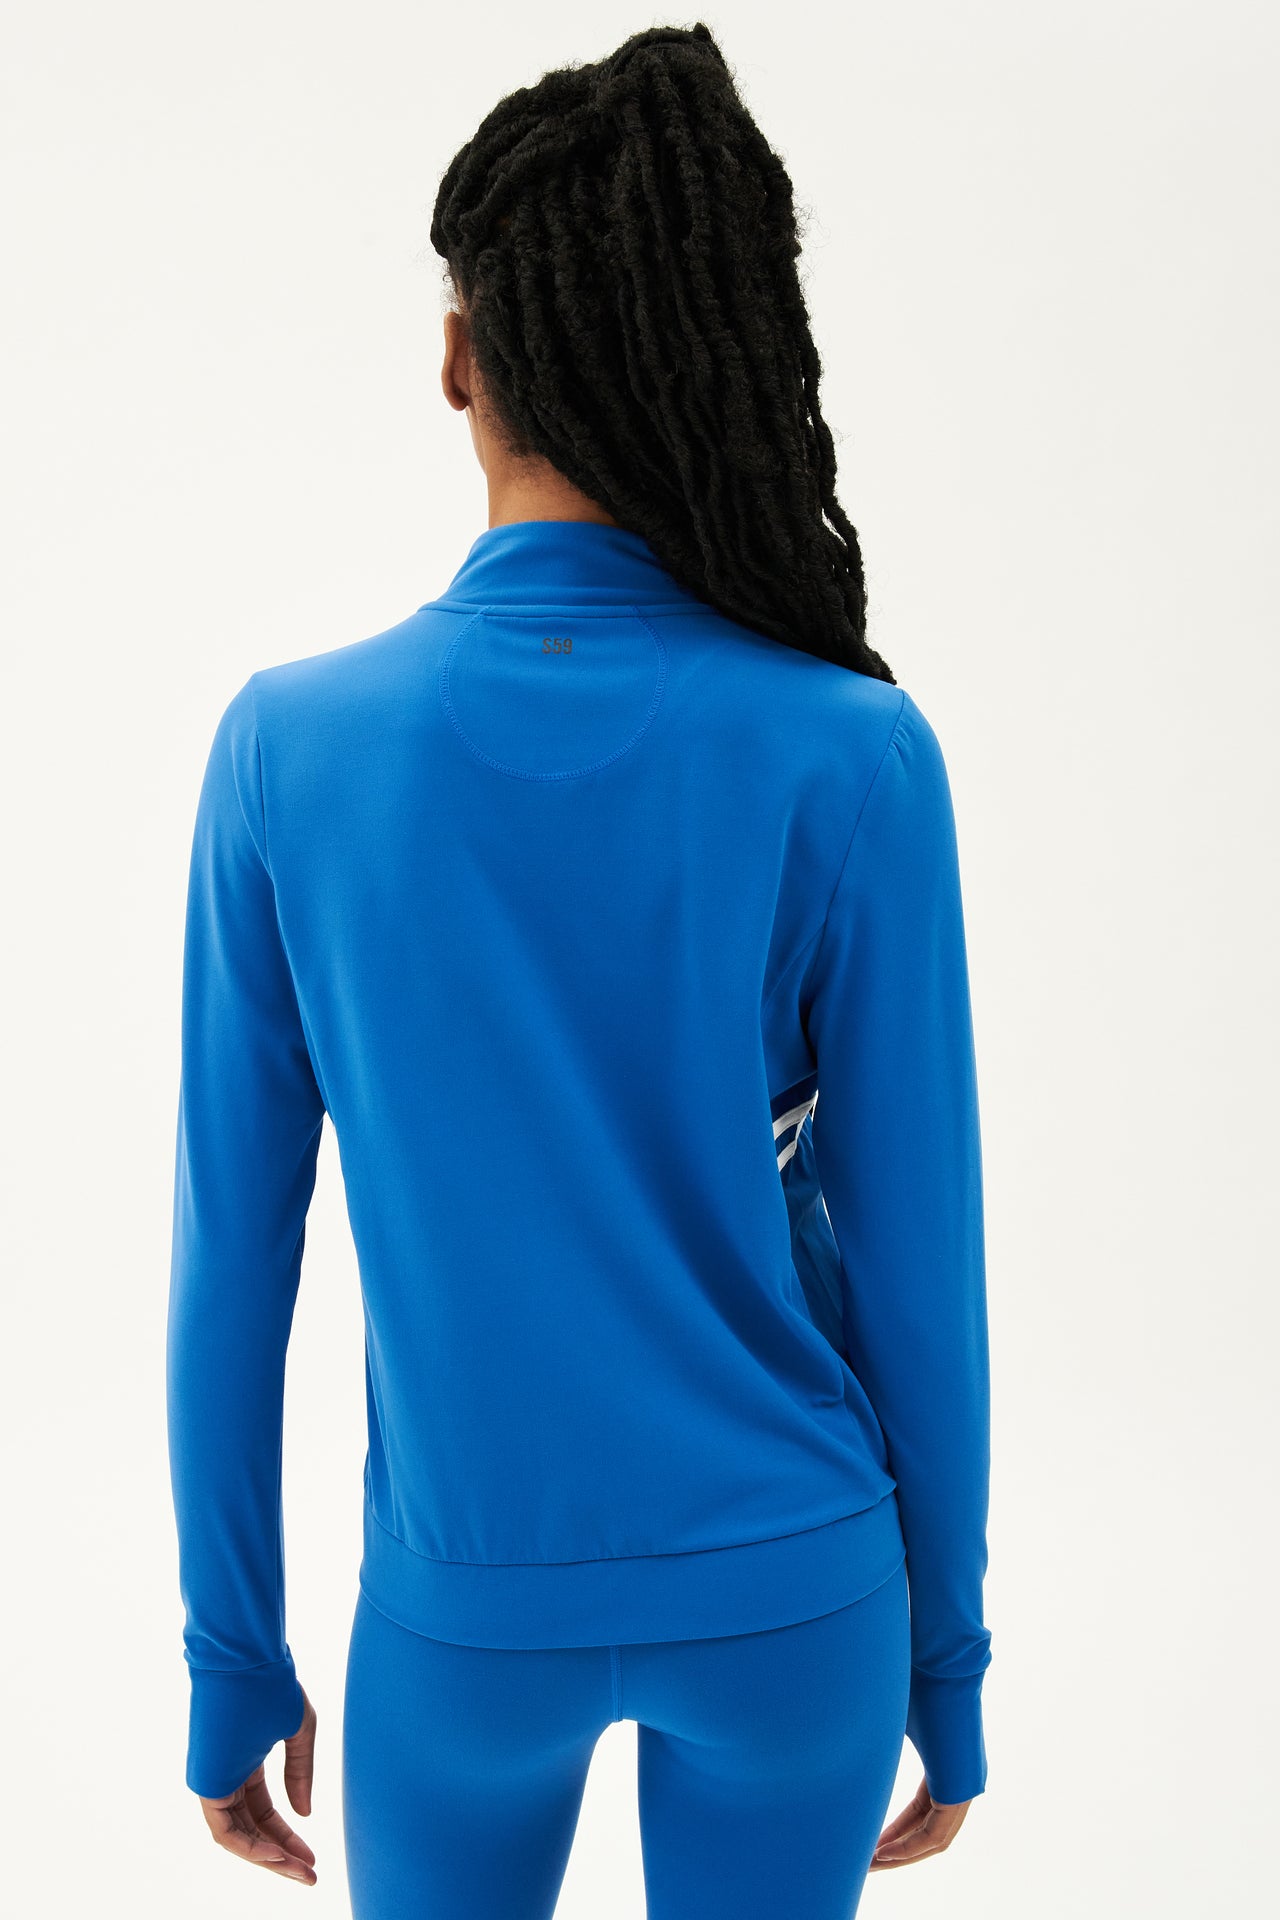 The back view of a woman wearing a SPLITS59 Rain Airweight Jacket in Classic Blue/White, suitable for Pilates.